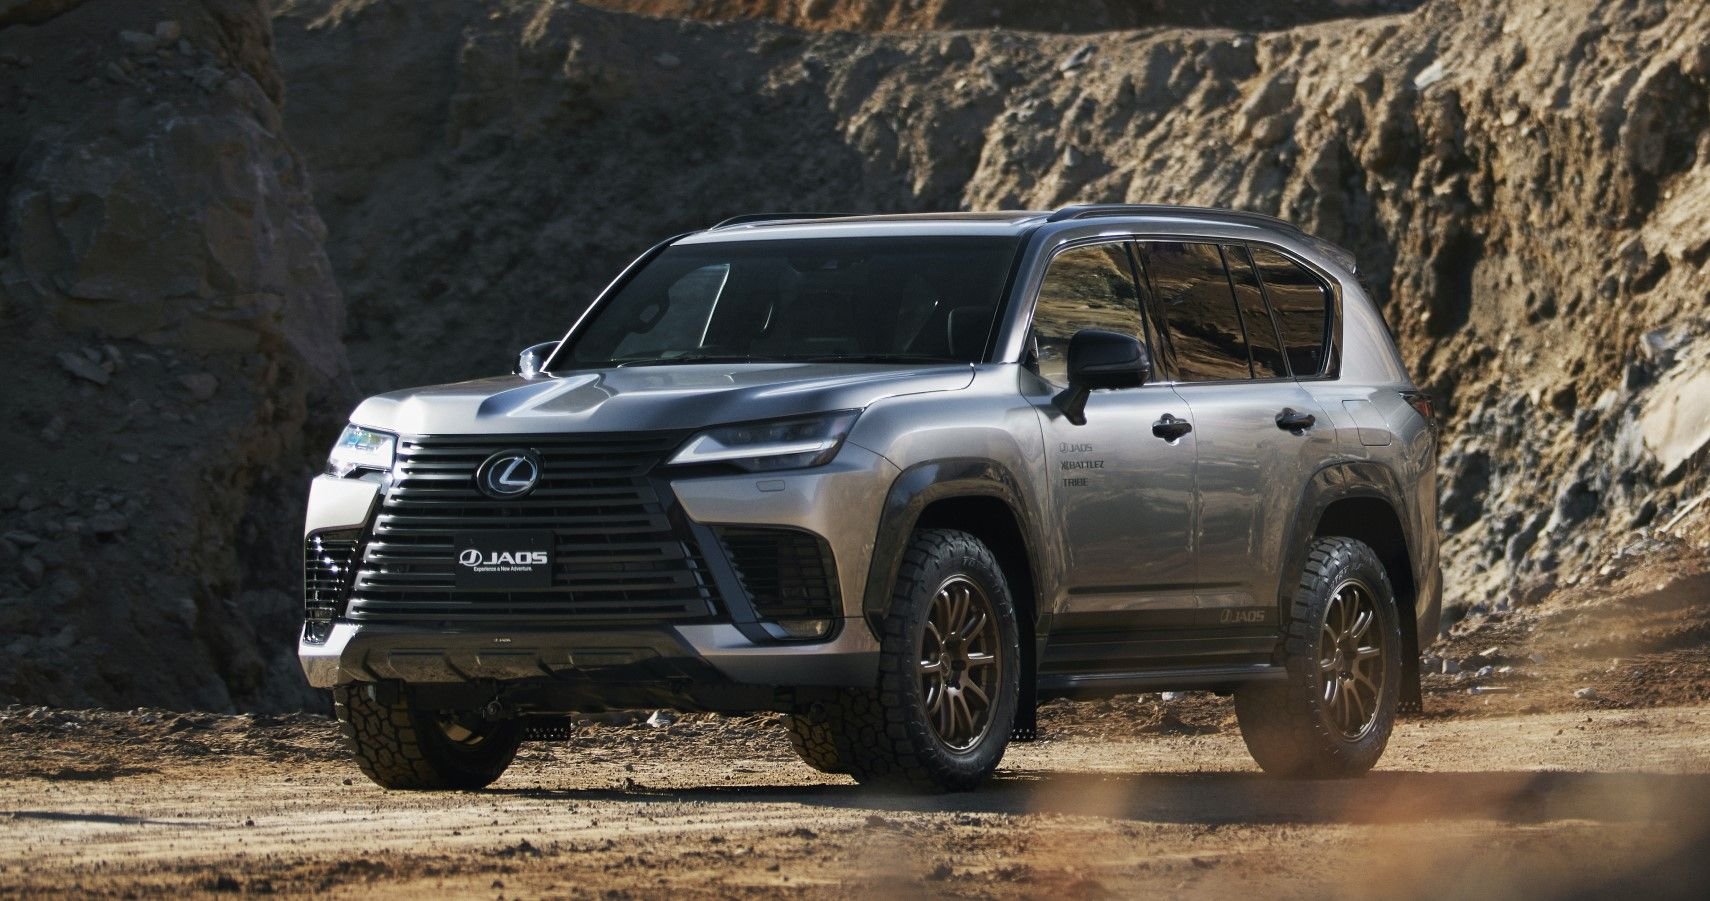 Check Out This JAOS-Modified Lexus LX600